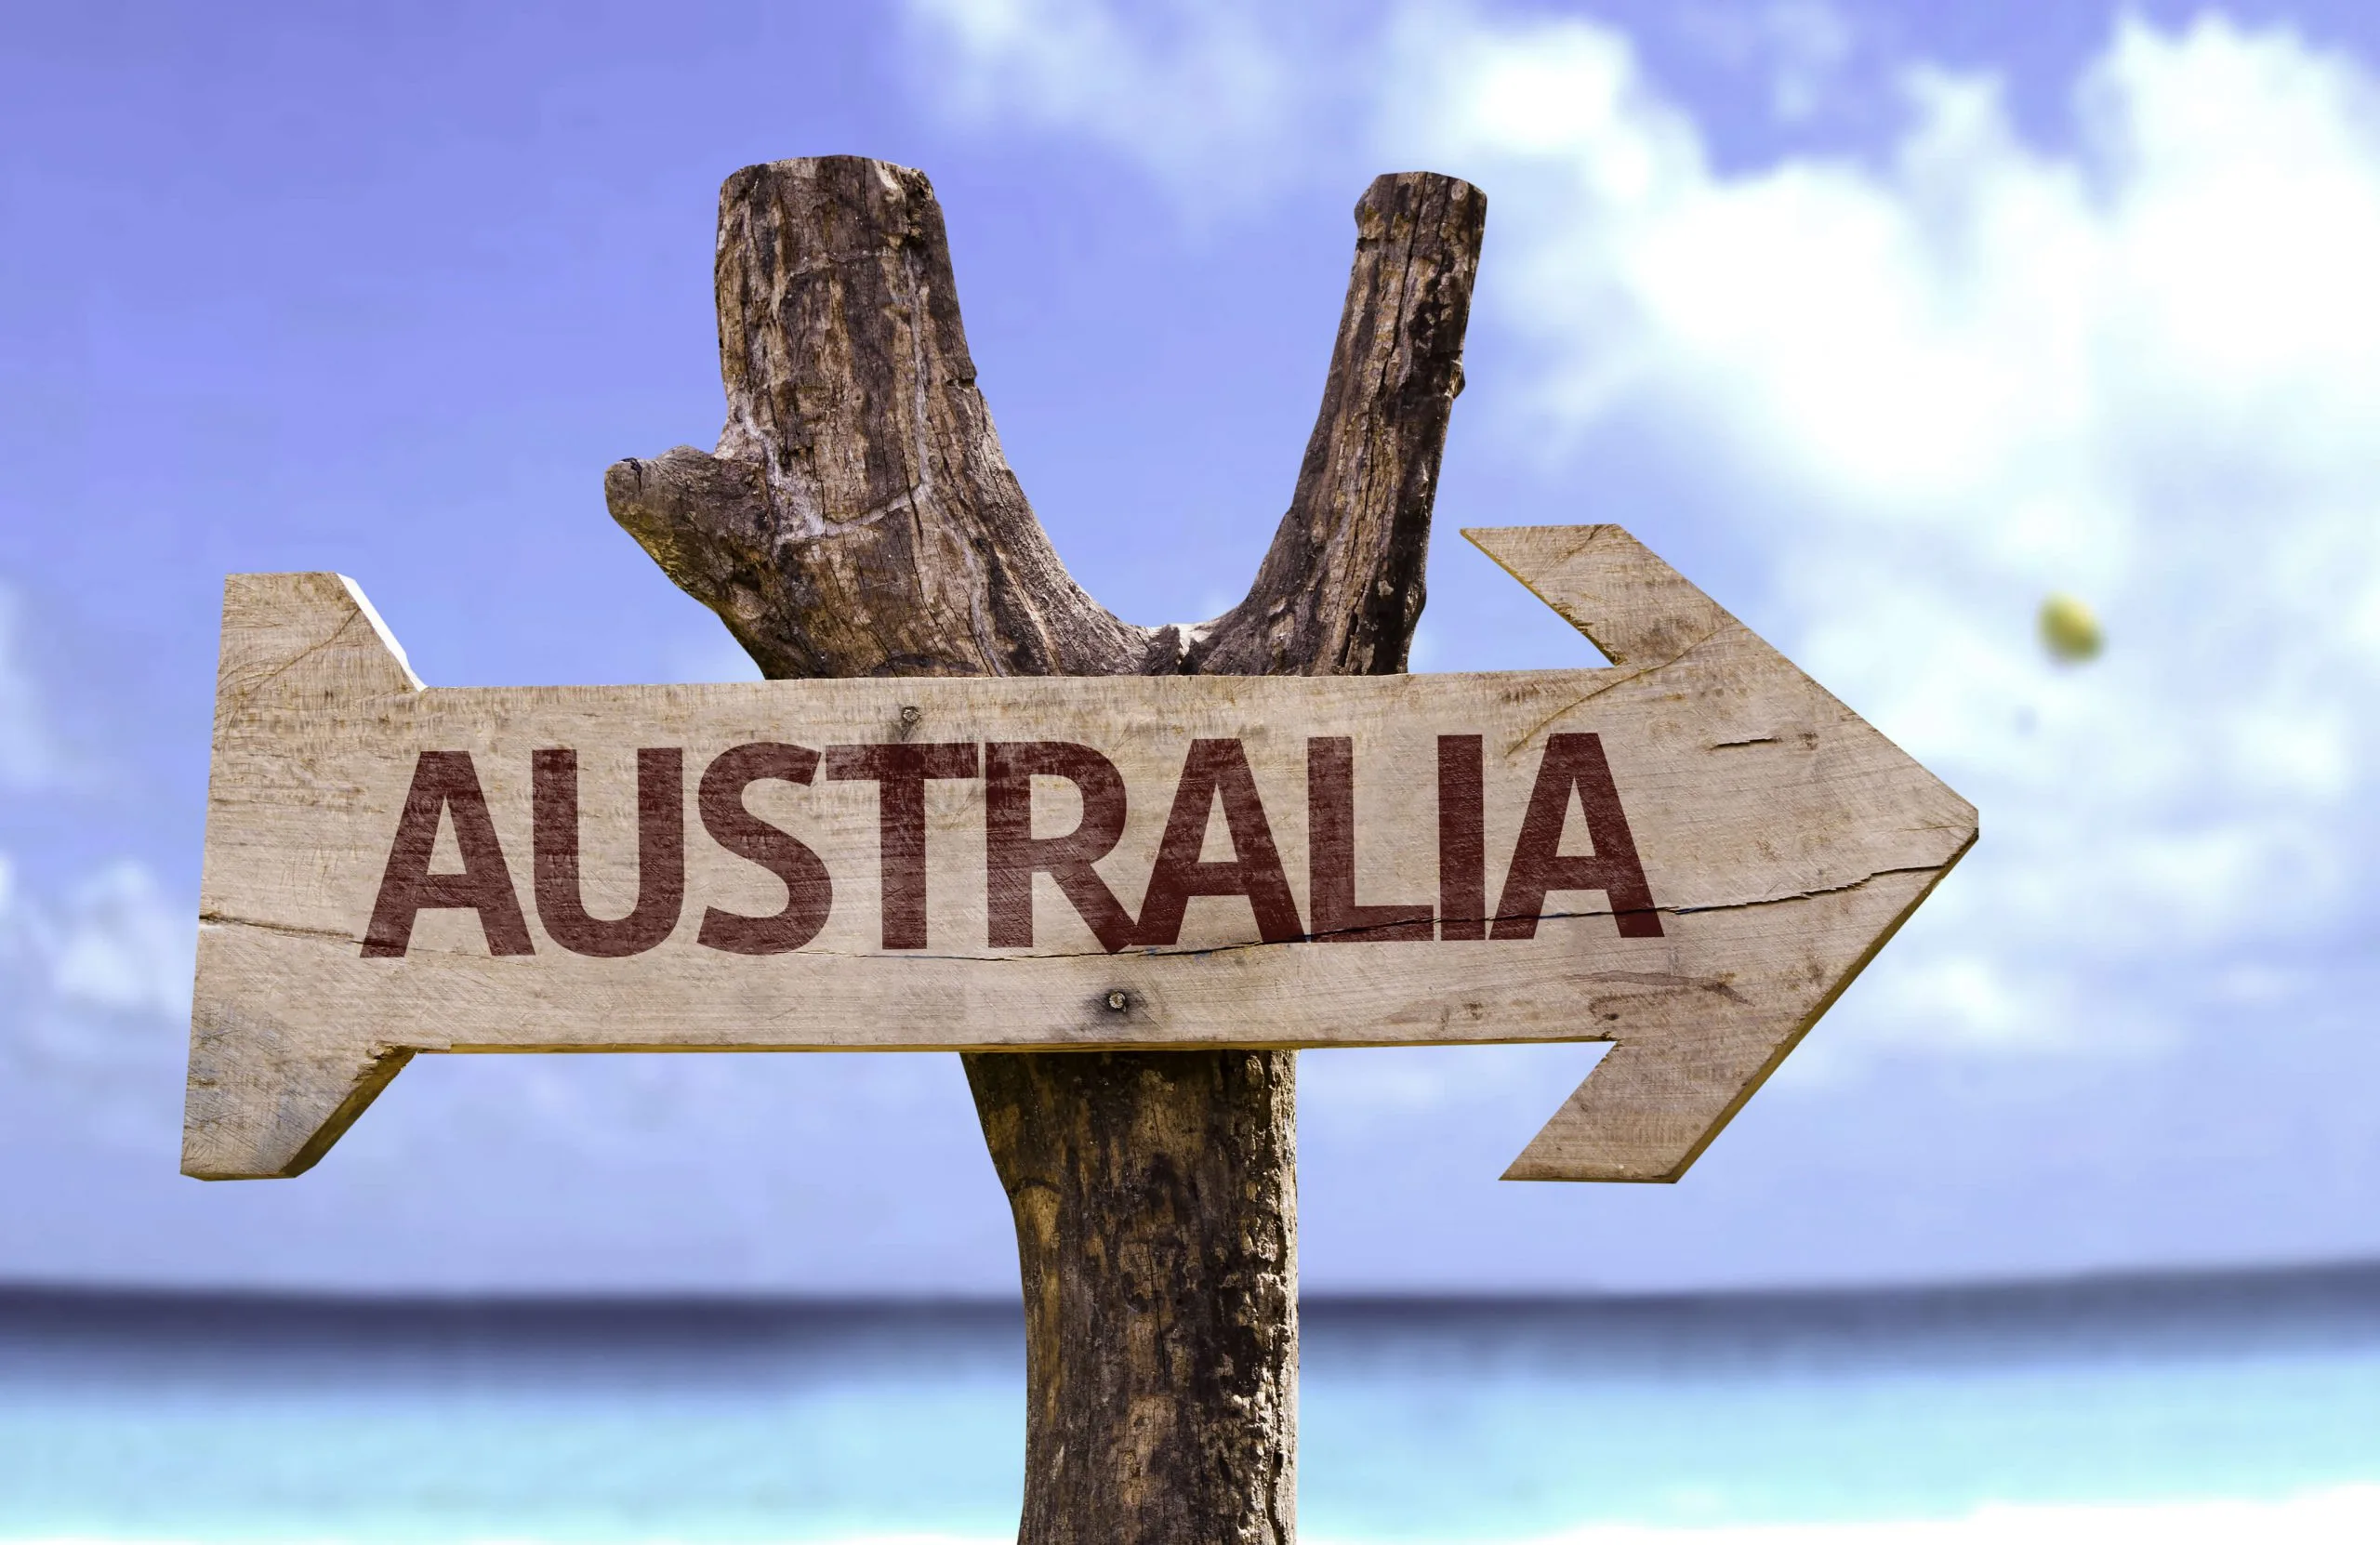 Travel Sensible: Your Full-Guided Plan to Reach Australia on VacationWaits